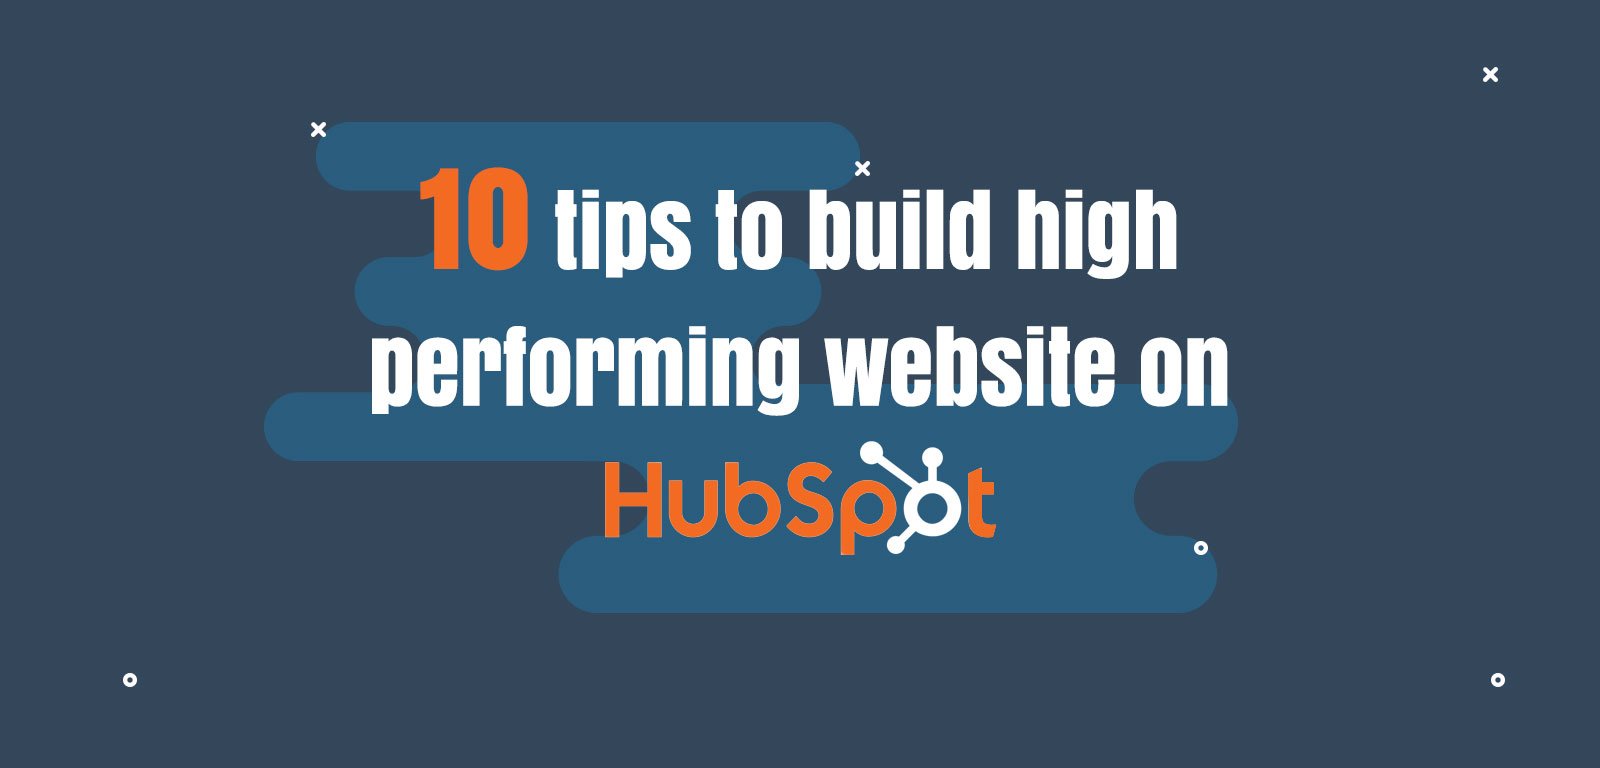 10 tips to build high performing website on Hubspot